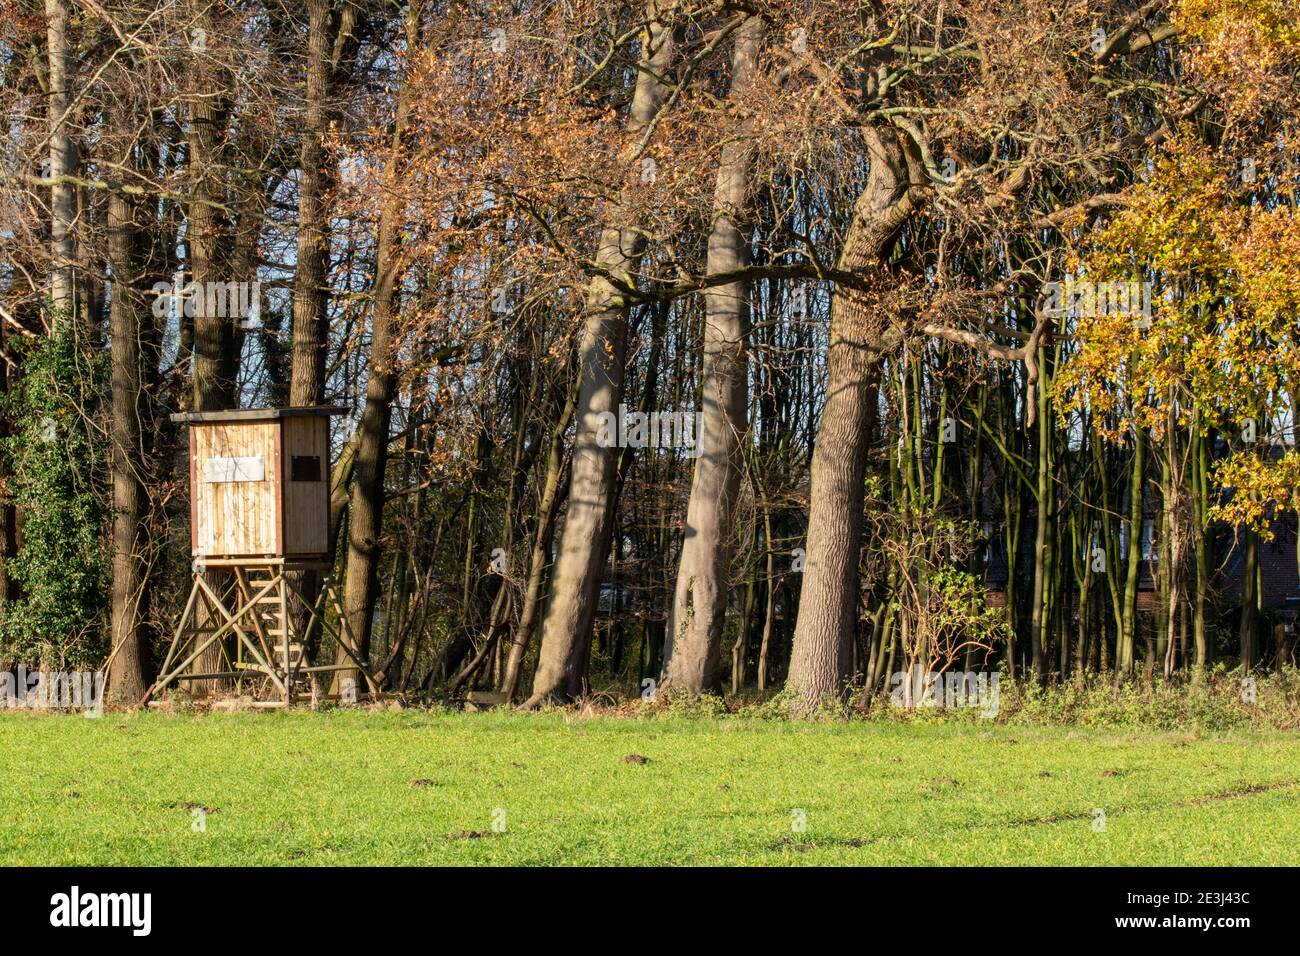 Wooden raised hide at the edge of the forest as a hide for hunters and for animal observation. Stock Photo